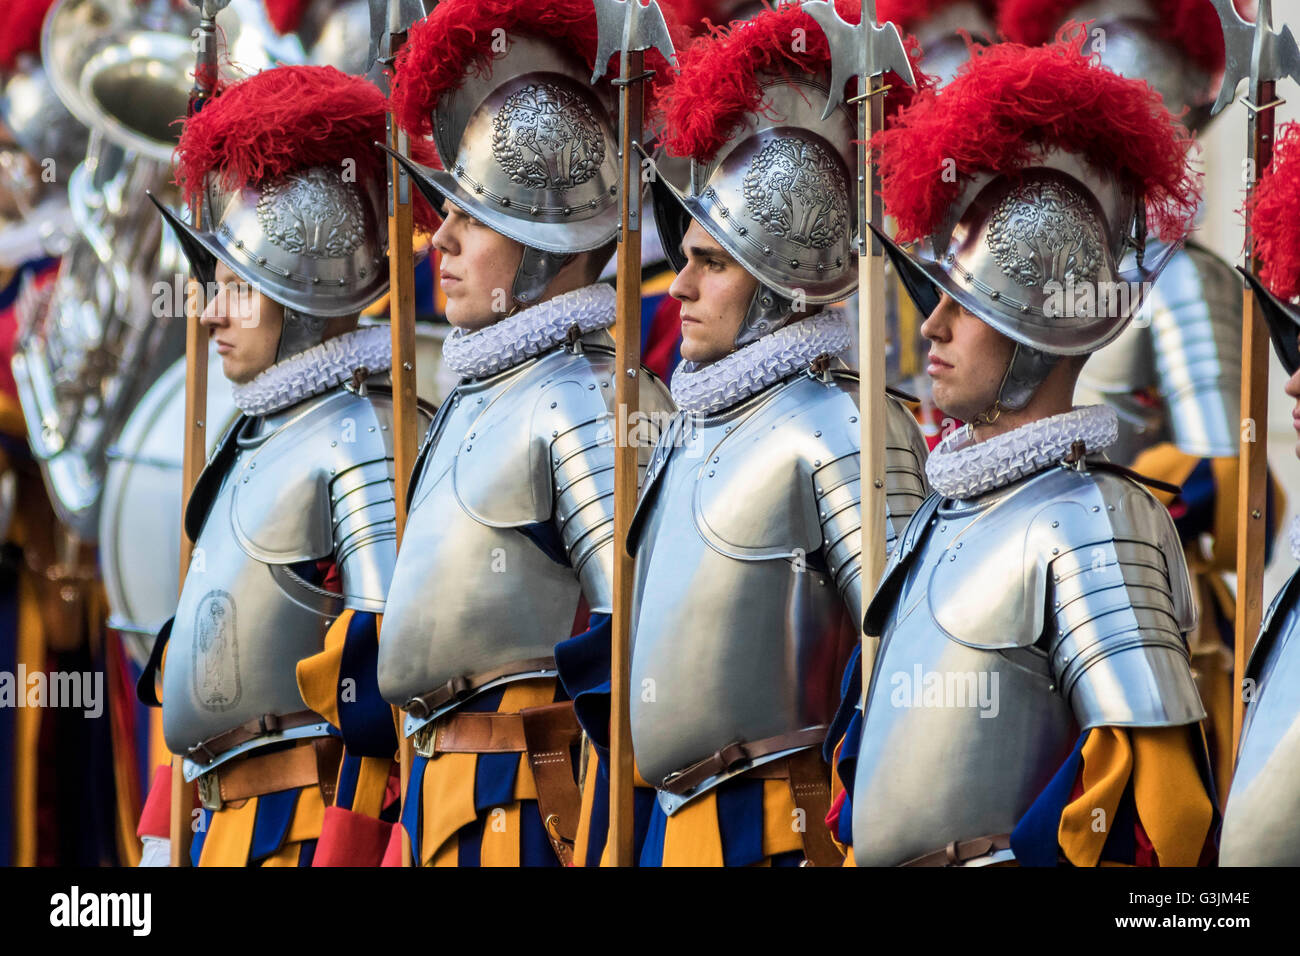 Vatican City, Vatican. 06th May, 2016. Swiss Guards take part in a swearing-in ceremony in San Damaso Courtyard. The annual swearing-in ceremony for the new papal Swiss Guards takes place on May 6, commemorating the 147 who died defending Pope Clement VII on the same day in 1527 during the sack of Rome. © Giuseppe Ciccia/Pacific Press/Alamy Live News Stock Photo